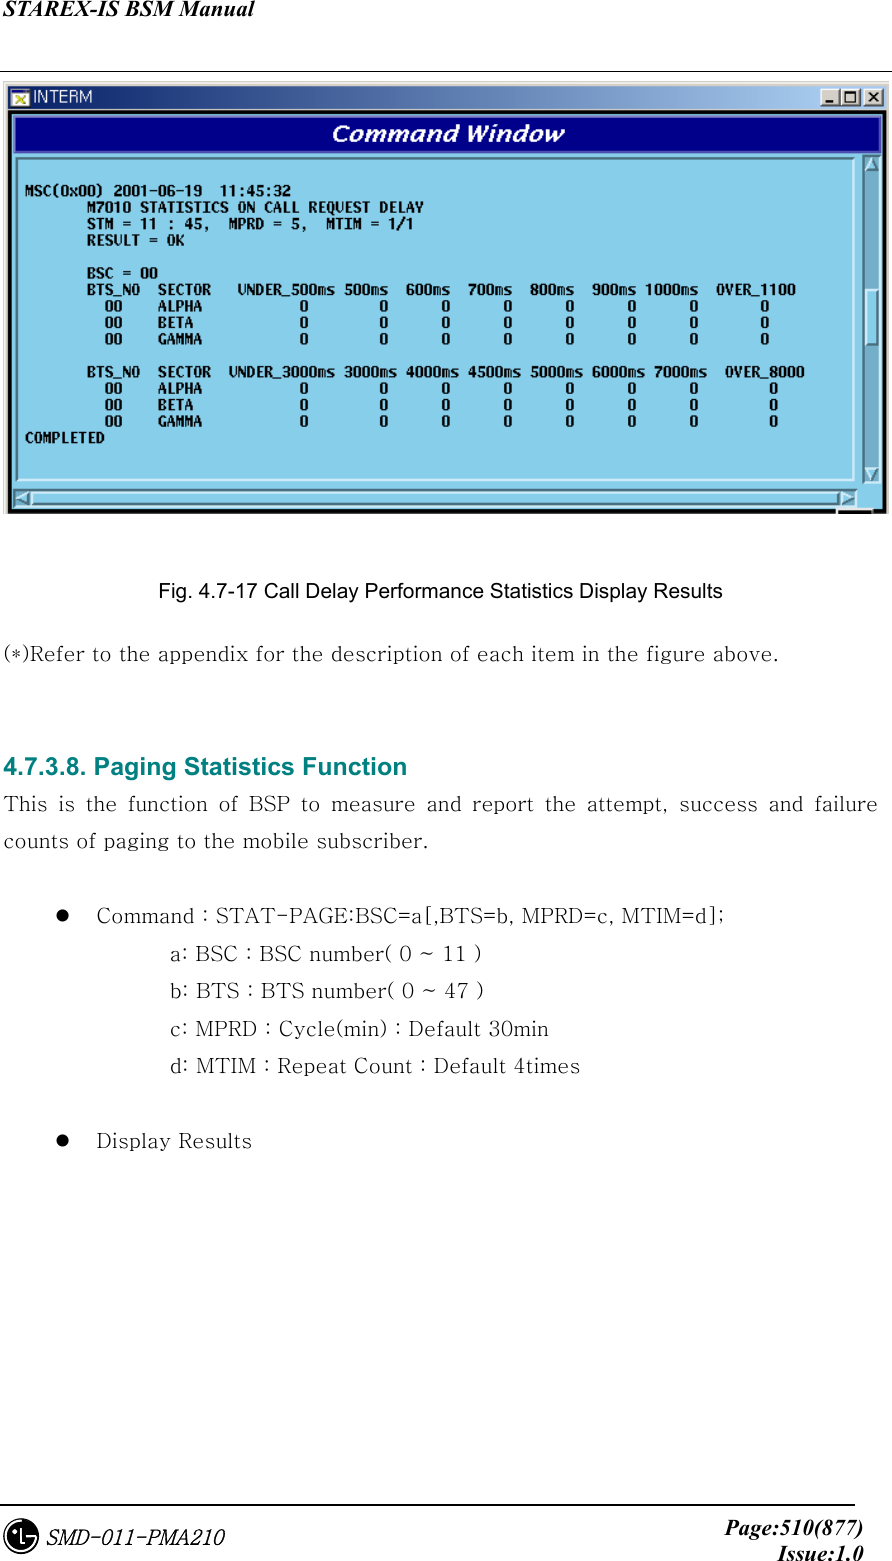 STAREX-IS BSM Manual     Page:510(877)Issue:1.0SMD-011-PMA210  Fig. 4.7-17 Call Delay Performance Statistics Display Results (*)Refer to the appendix for the description of each item in the figure above.   4.7.3.8. Paging Statistics Function This  is  the  function  of  BSP  to  measure  and  report  the  attempt,  success  and  failure counts of paging to the mobile subscriber.    Command : STAT-PAGE:BSC=a[,BTS=b, MPRD=c, MTIM=d];       a: BSC : BSC number( 0 ~ 11 )       b: BTS : BTS number( 0 ~ 47 )       c: MPRD : Cycle(min) : Default 30min       d: MTIM : Repeat Count : Default 4times    Display Results  